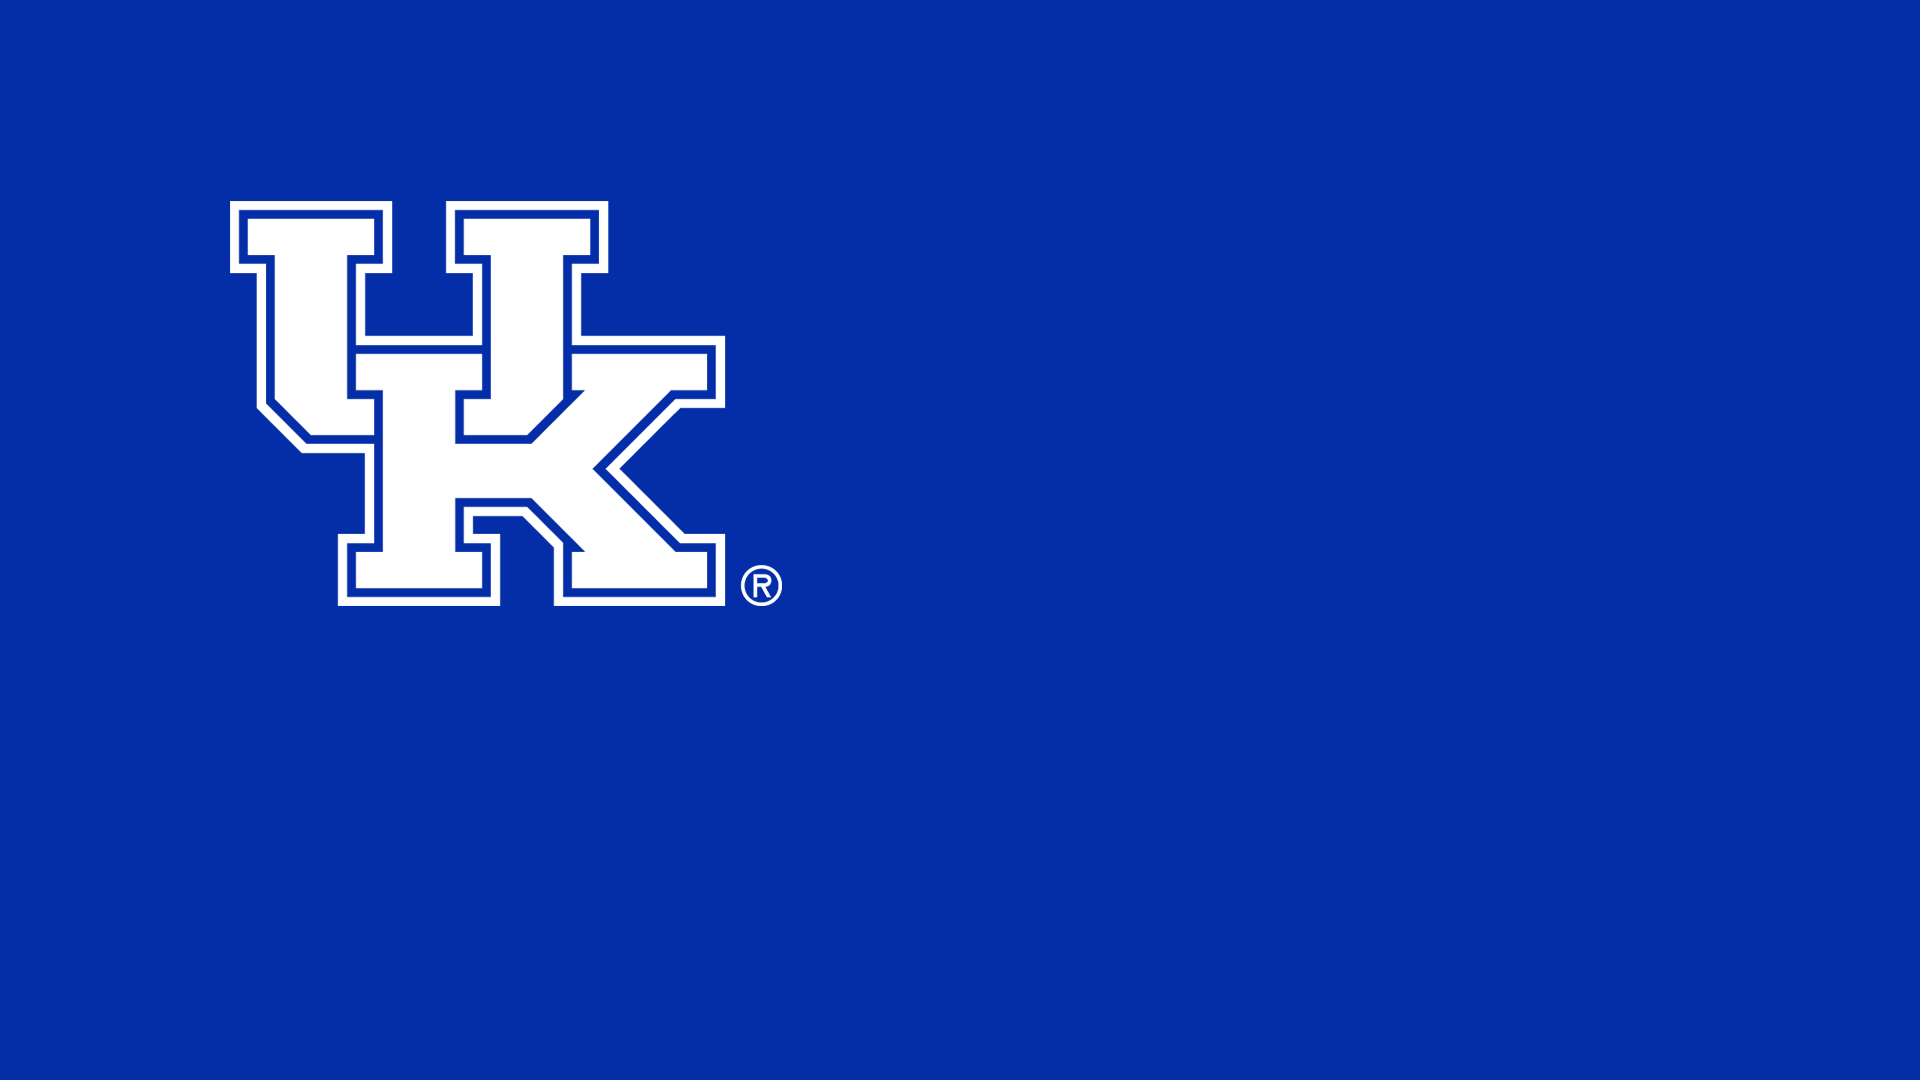 UK Athletics Home Events on Friday, Gymnastics and Baseball, Postponed Because of Severe Weather